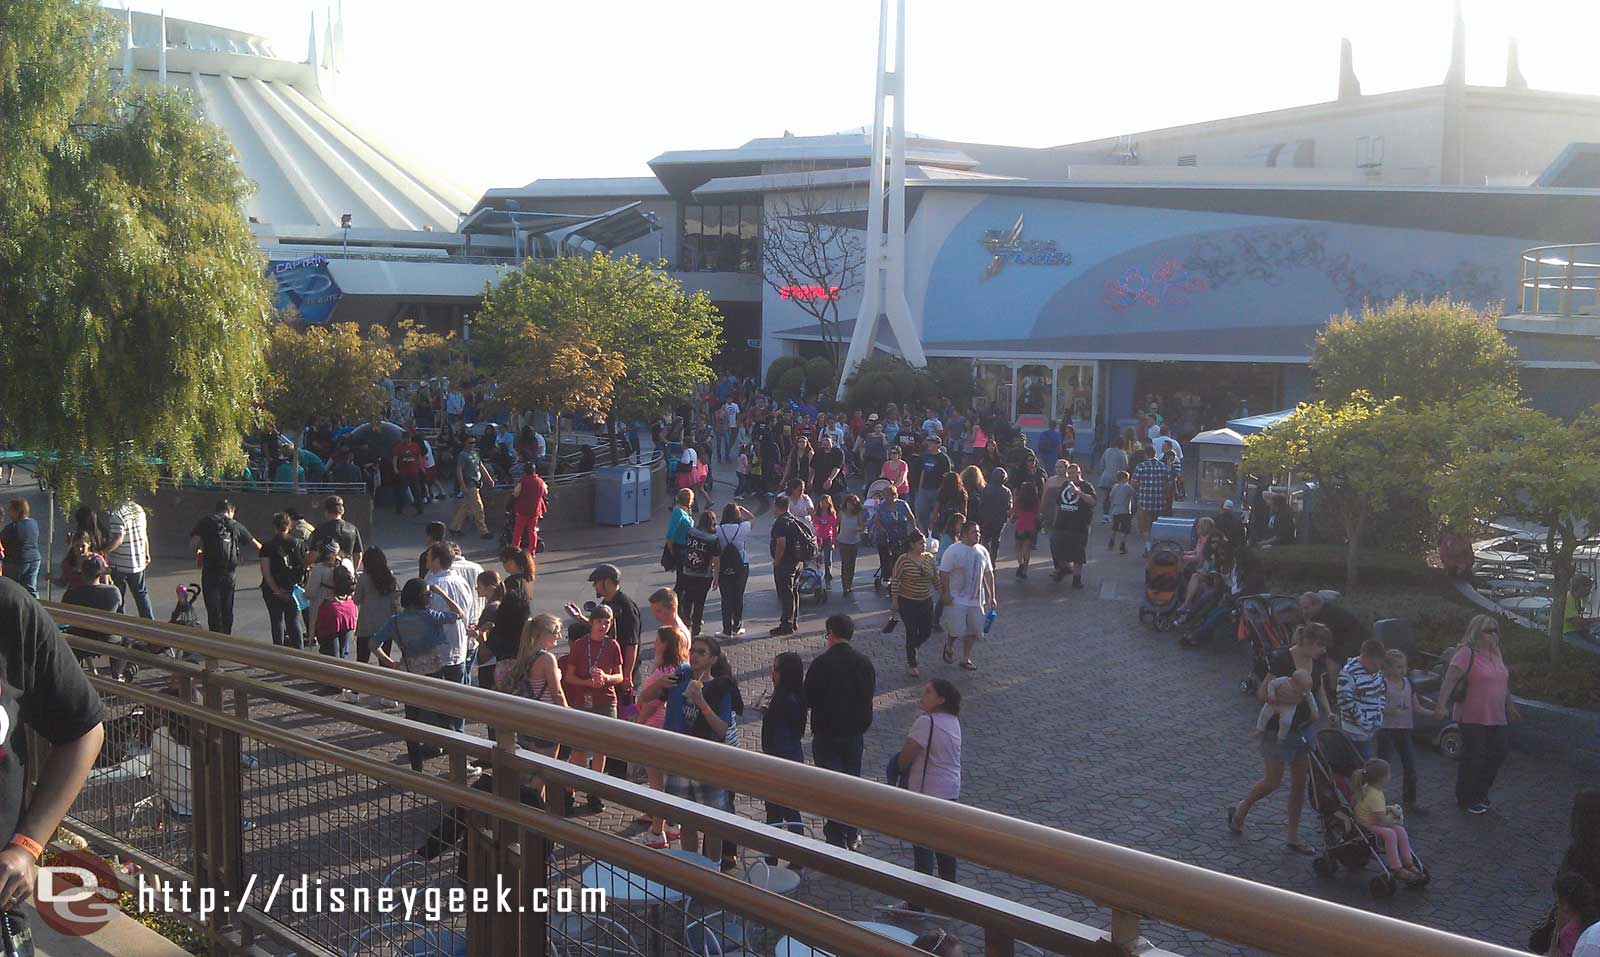 The line now stretches into Tomorrowland up the ramp of Innoventions and wraps on the 2nd story